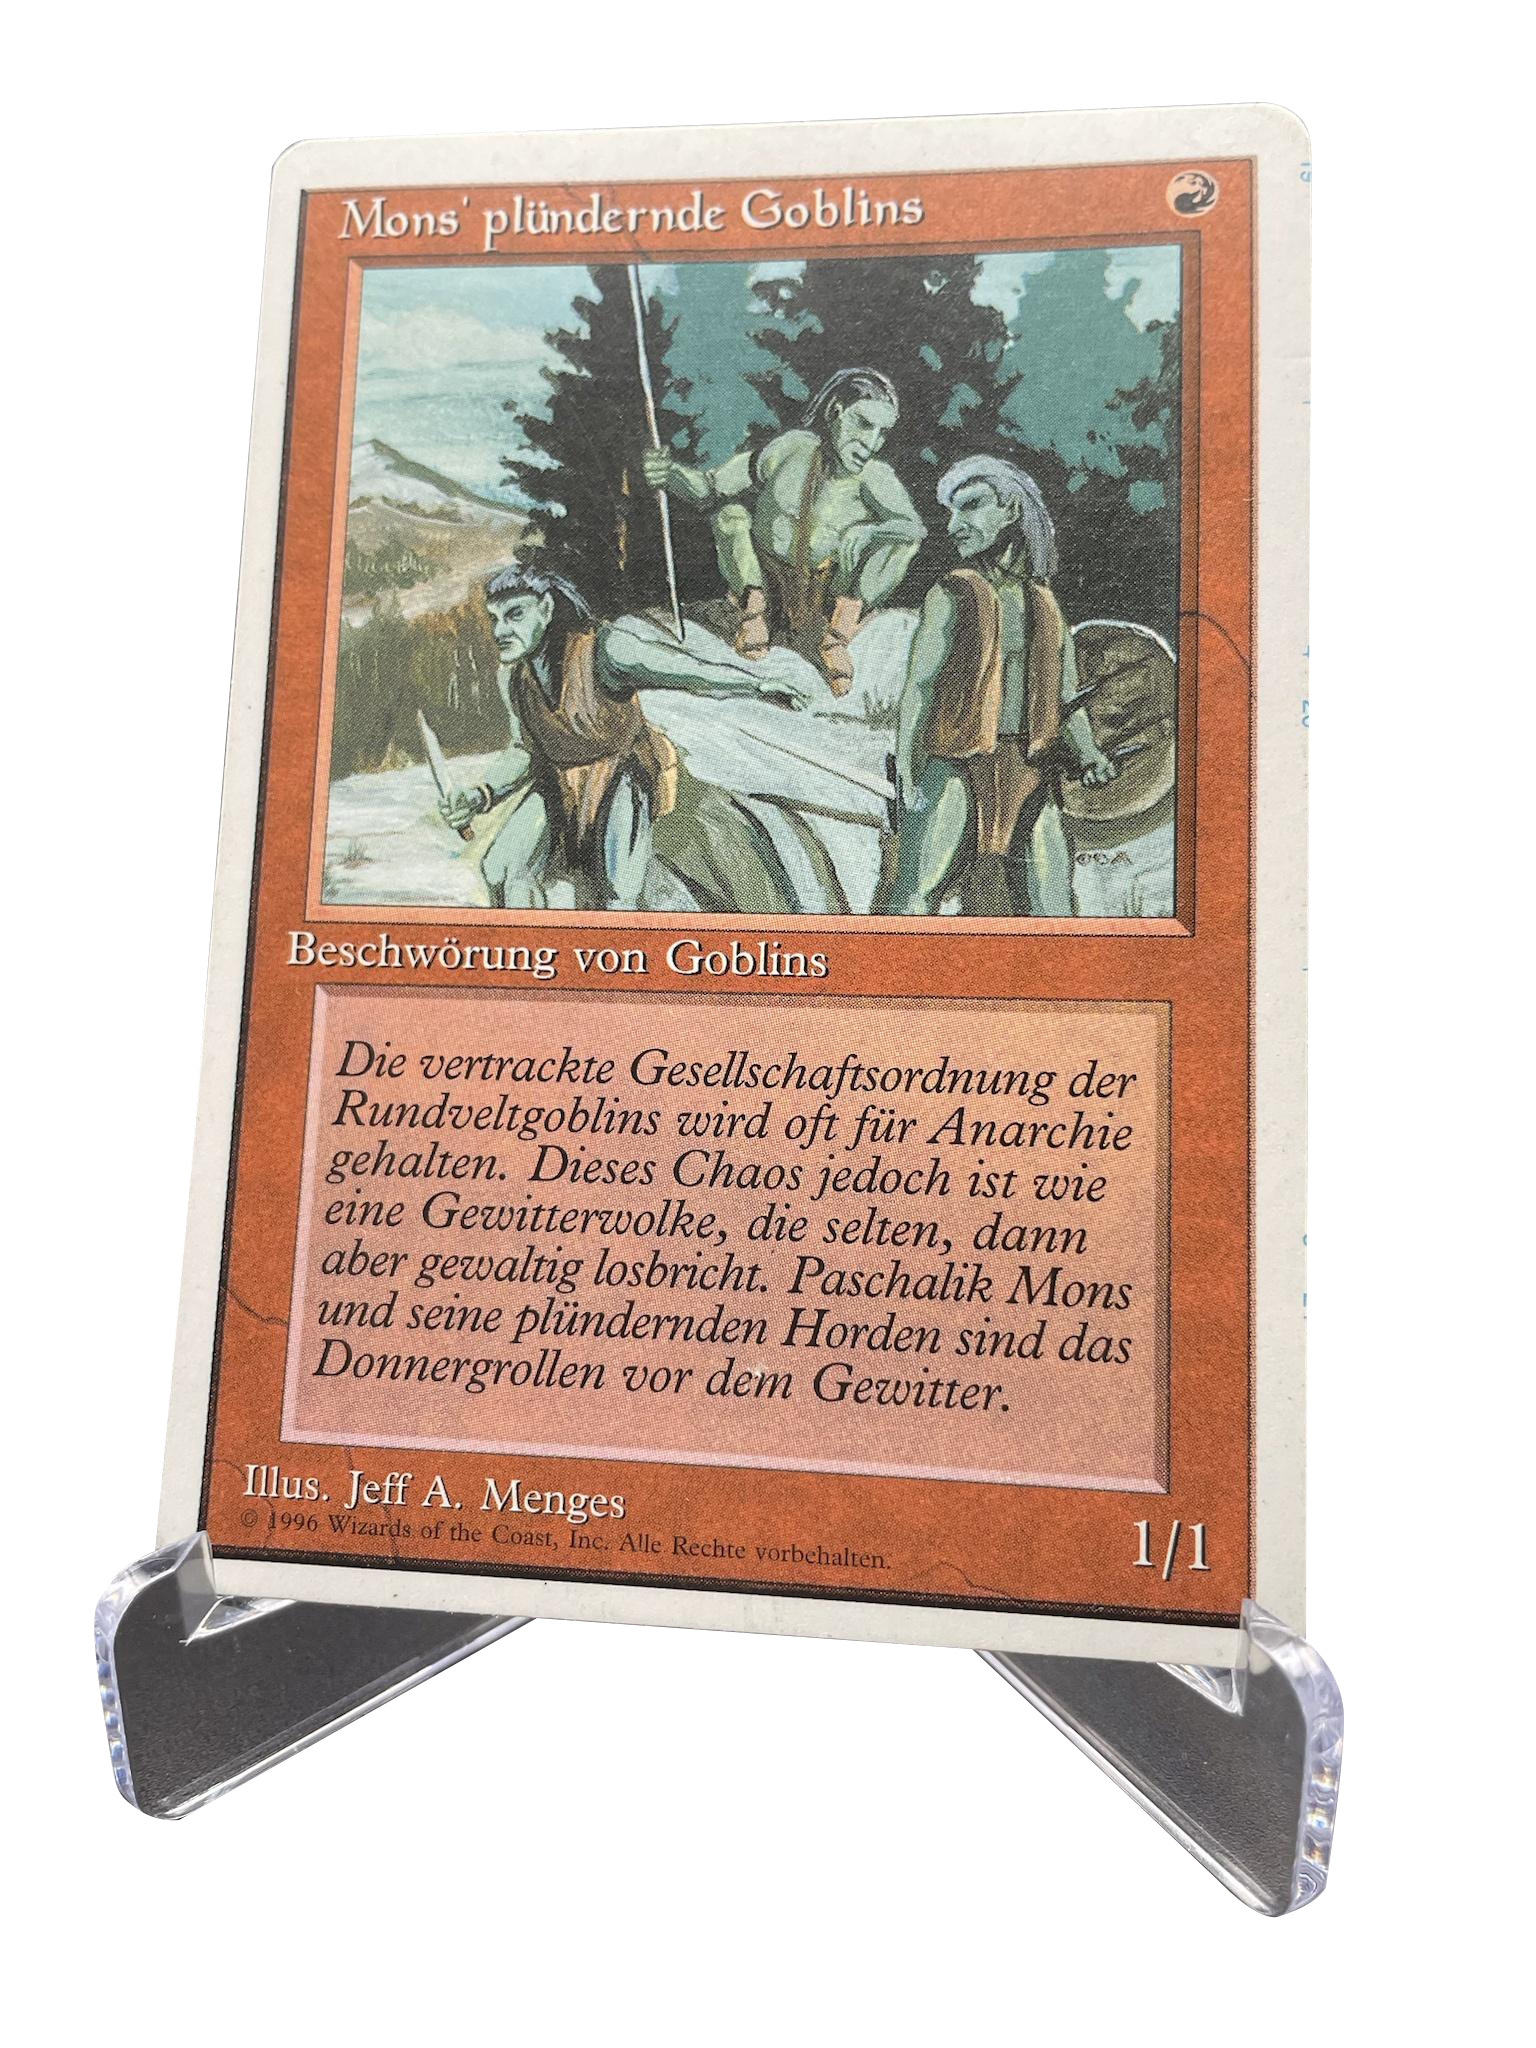 Magic the Gathering - Mons' plündernde Goblins (Introductory Two-Player Set) Miscut Sheet Edge